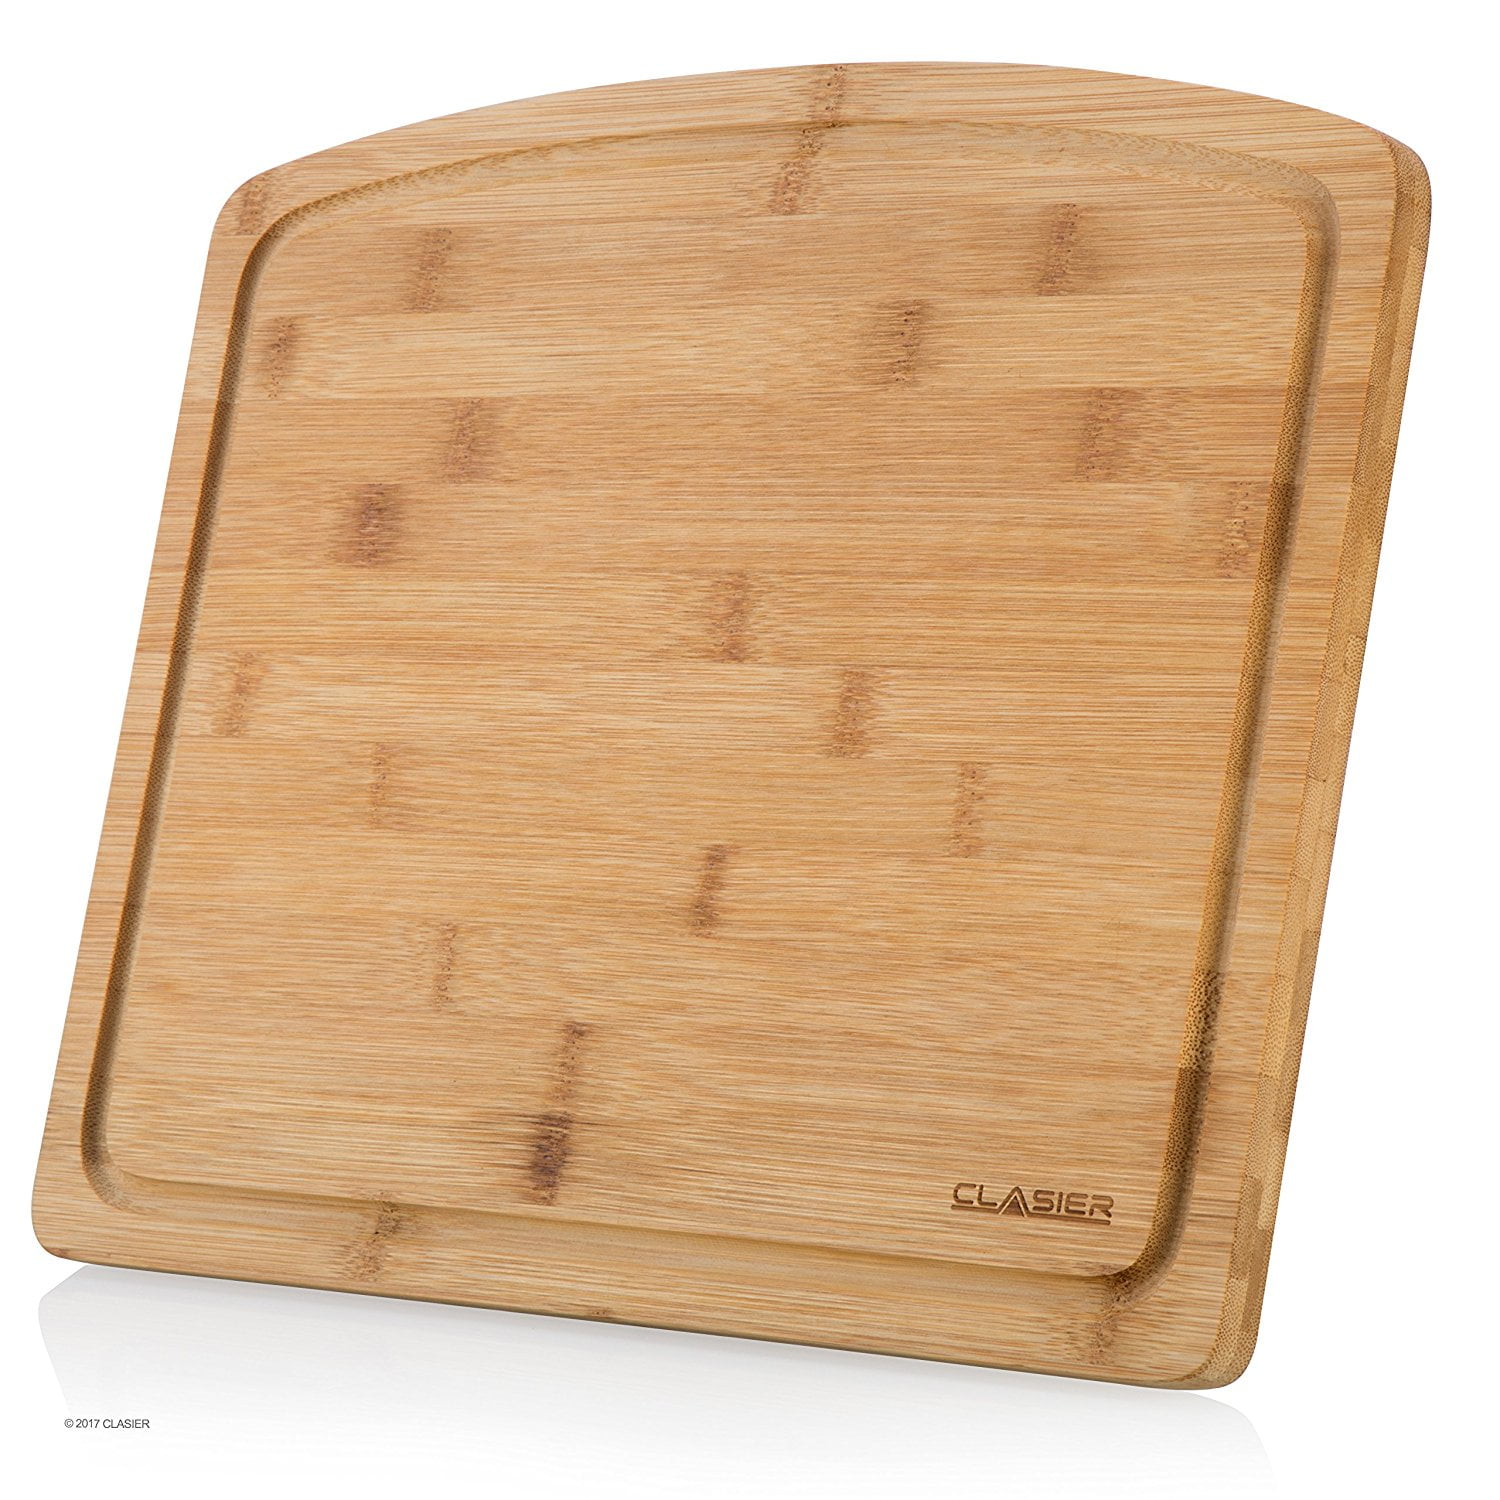 Jaswehome Organic Bamboo Cutting Board Set With Hang Hole Chopping